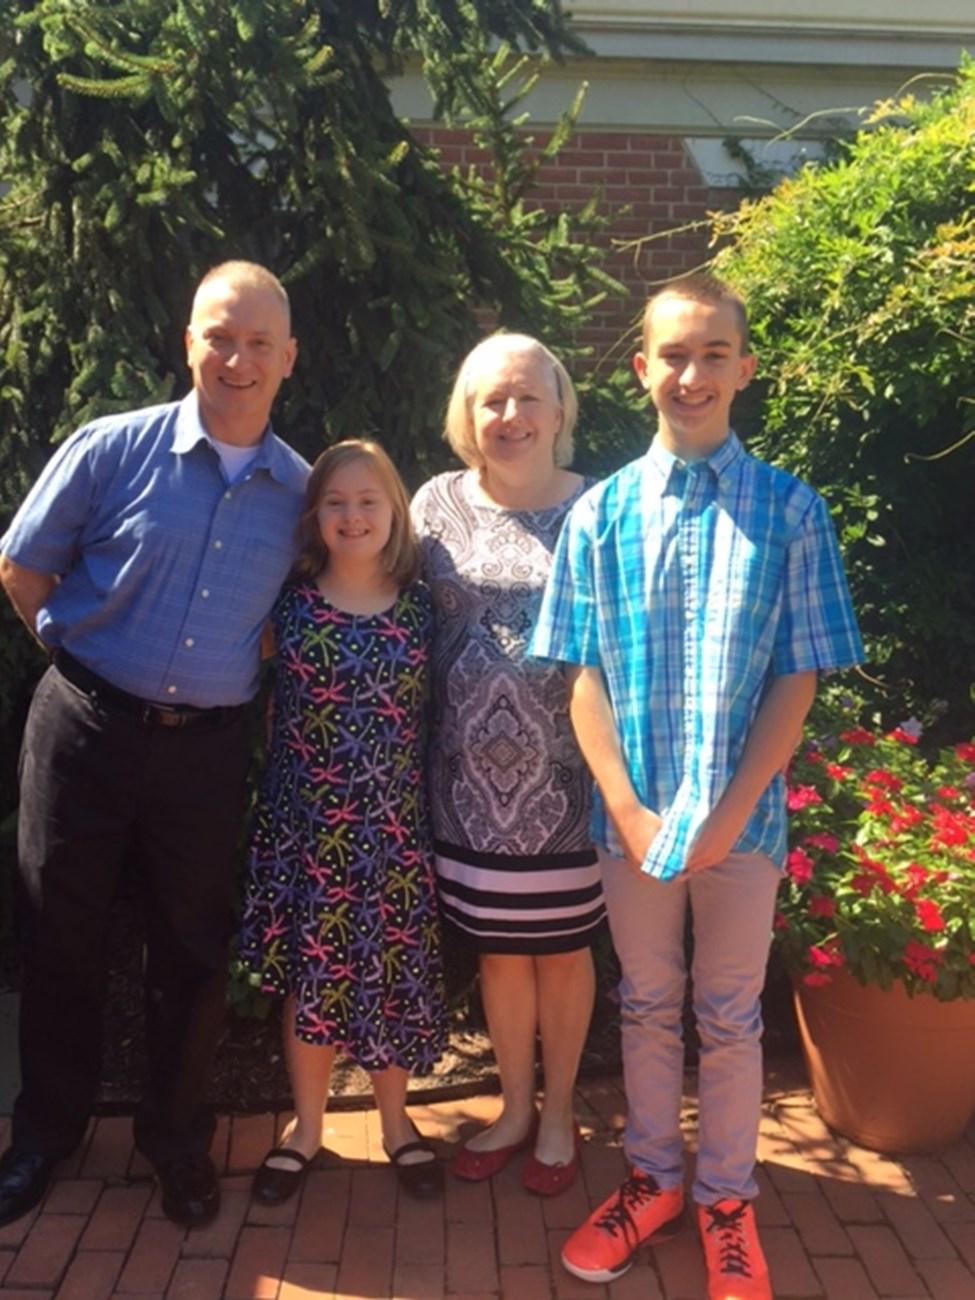 St. Matthew s welcomes Cynthia and Matt Loe into membership. The Loes have two children, Wesley, a rising 9 th grader at West Springfield HS and Danielle, a rising 6 th grader at Camelot Elementary.